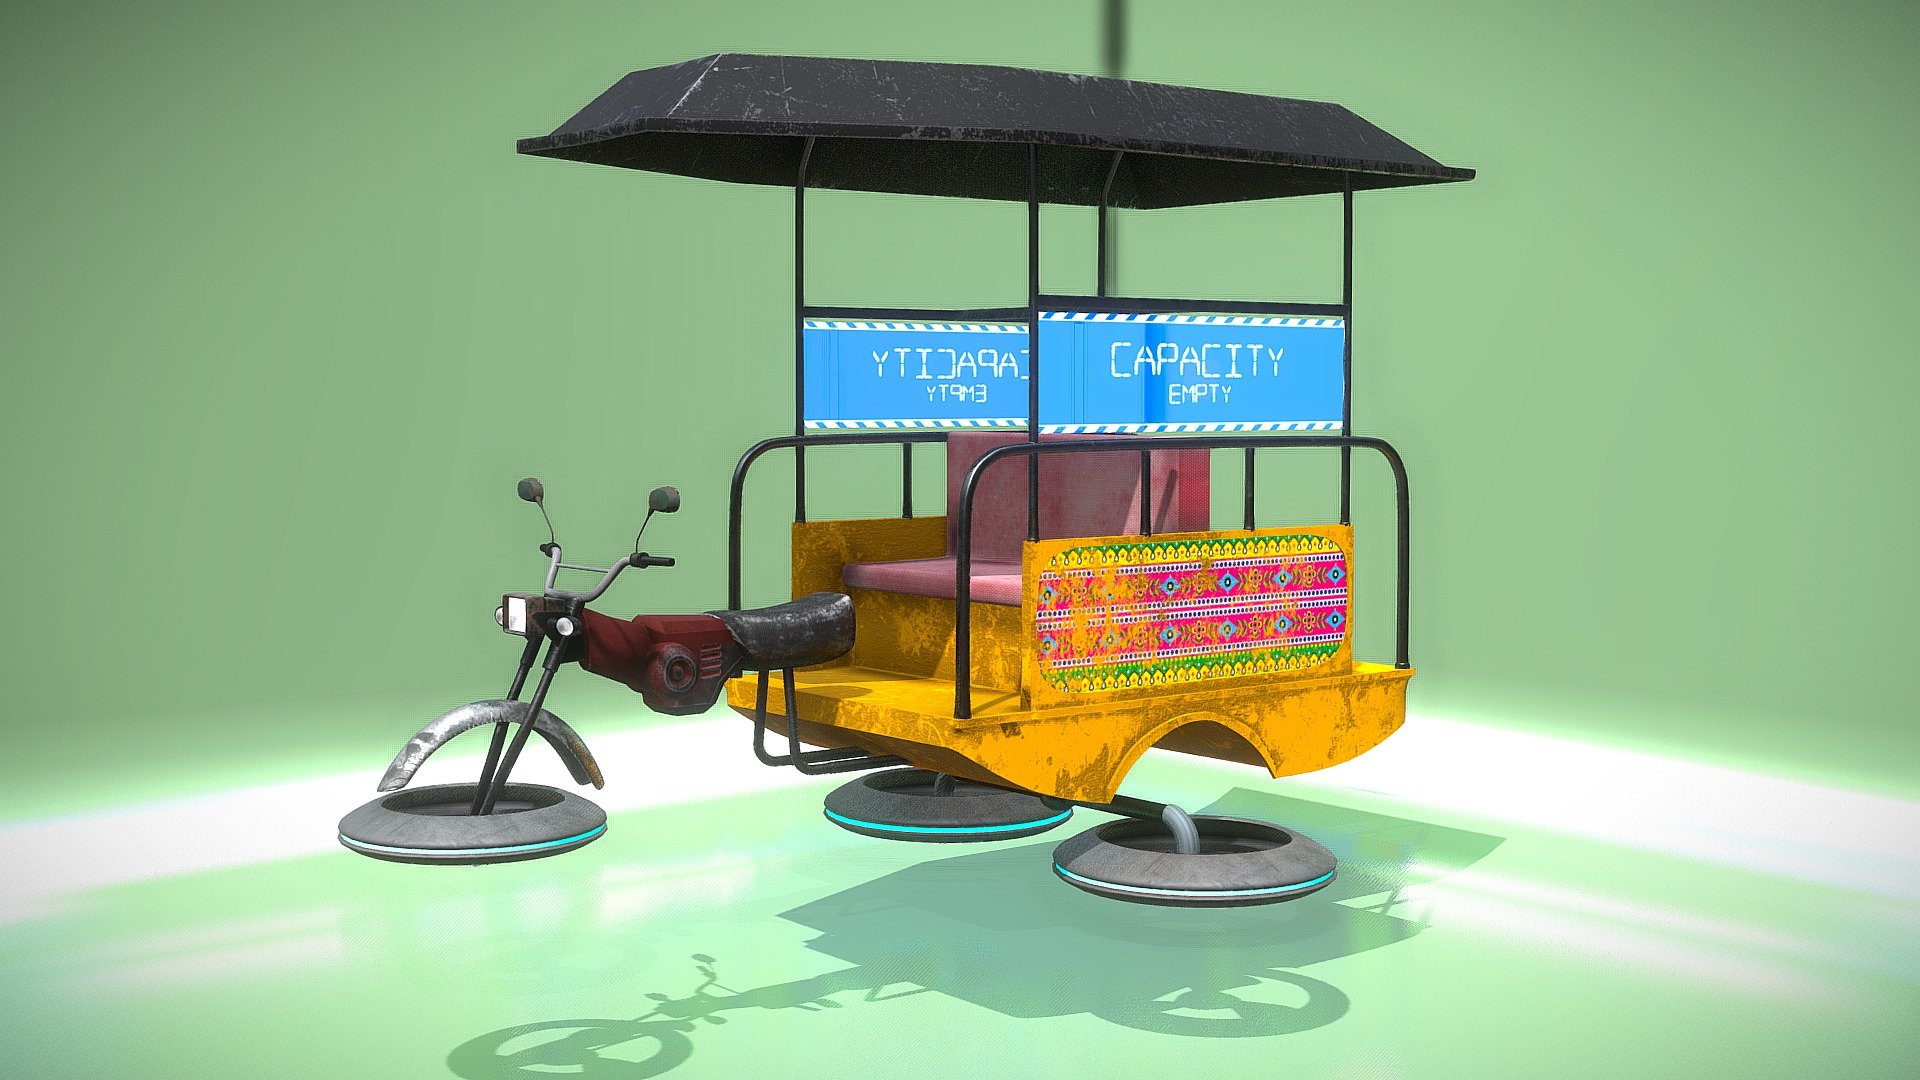 My Sci fi take on a qingqui/rickshaw that I built on top of a base reference by @Junaid_shakoor
https://sketchfab.com/3d-models/low-poly-qingqi-rickshaw-for-mobile-games-99a87f79f5bb45ab83d6379d98cf9838

Re-modeled and retextured the whole thing using Blender and Substance Painter 3d model